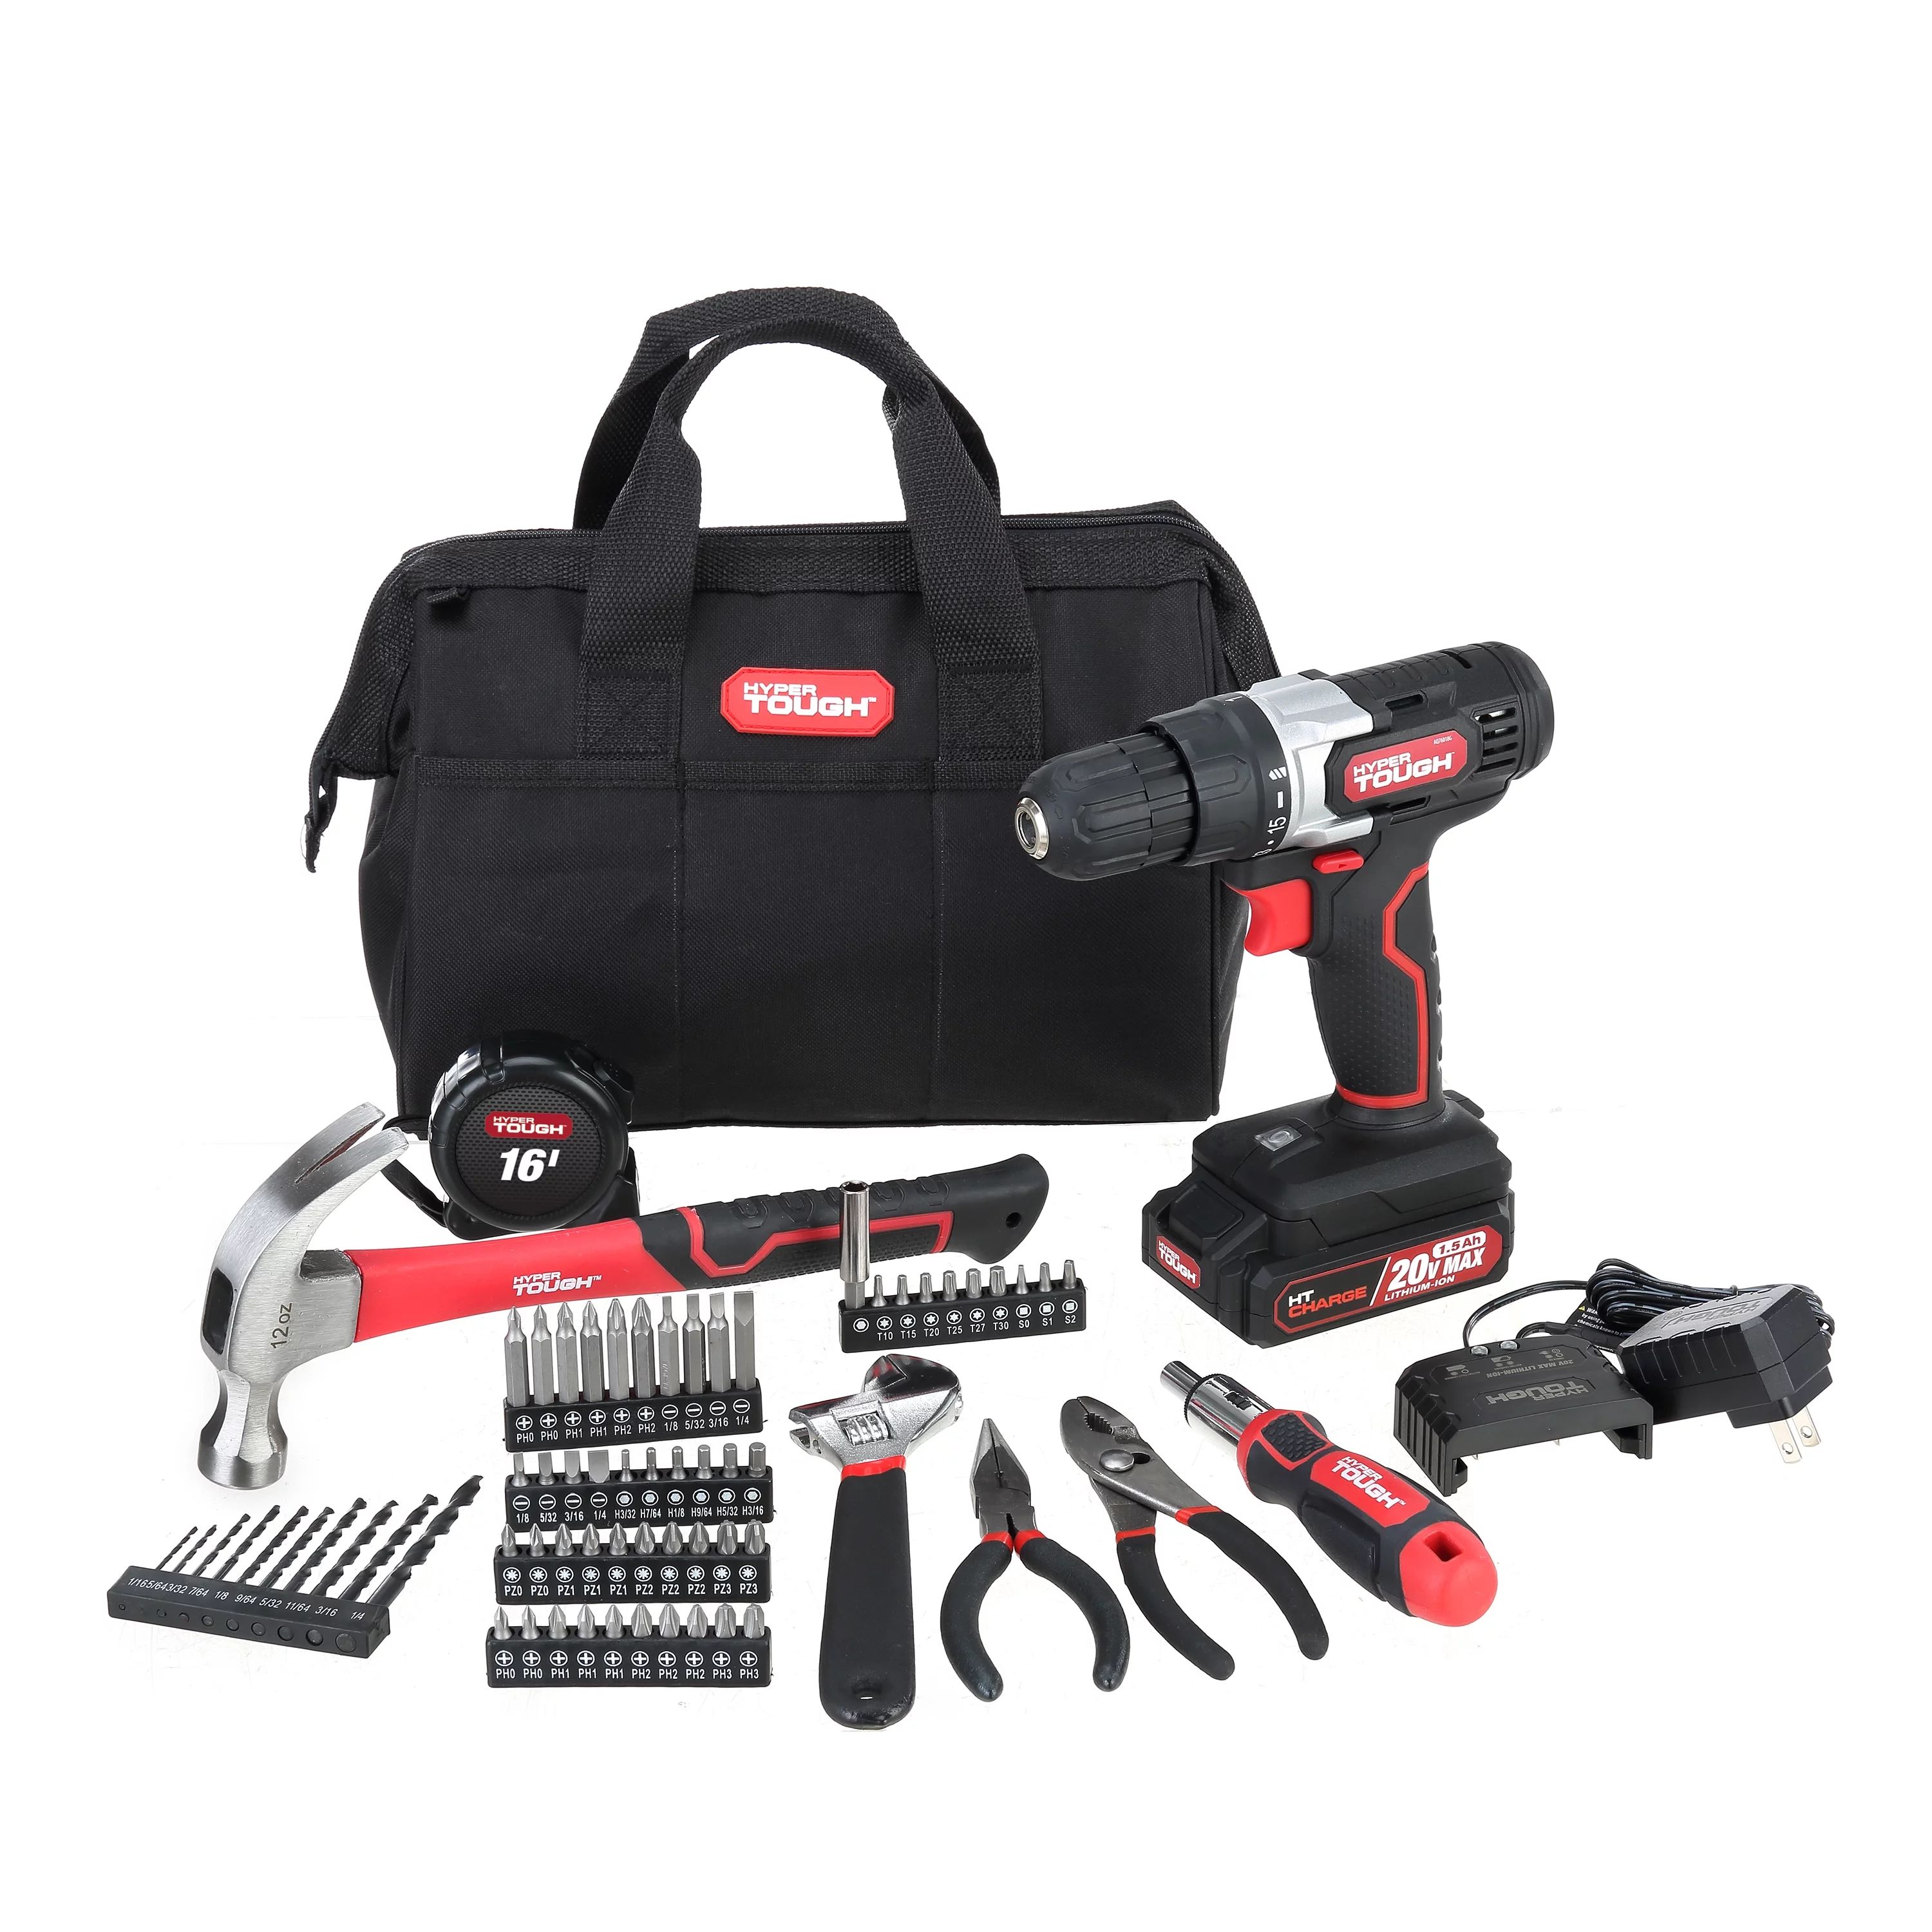 Hyper Tough 20V Max Lithium-ion 3/8 inch Cordless Drill & 70-Piece DIY Home Tool Set Project Kit ... | Walmart (US)